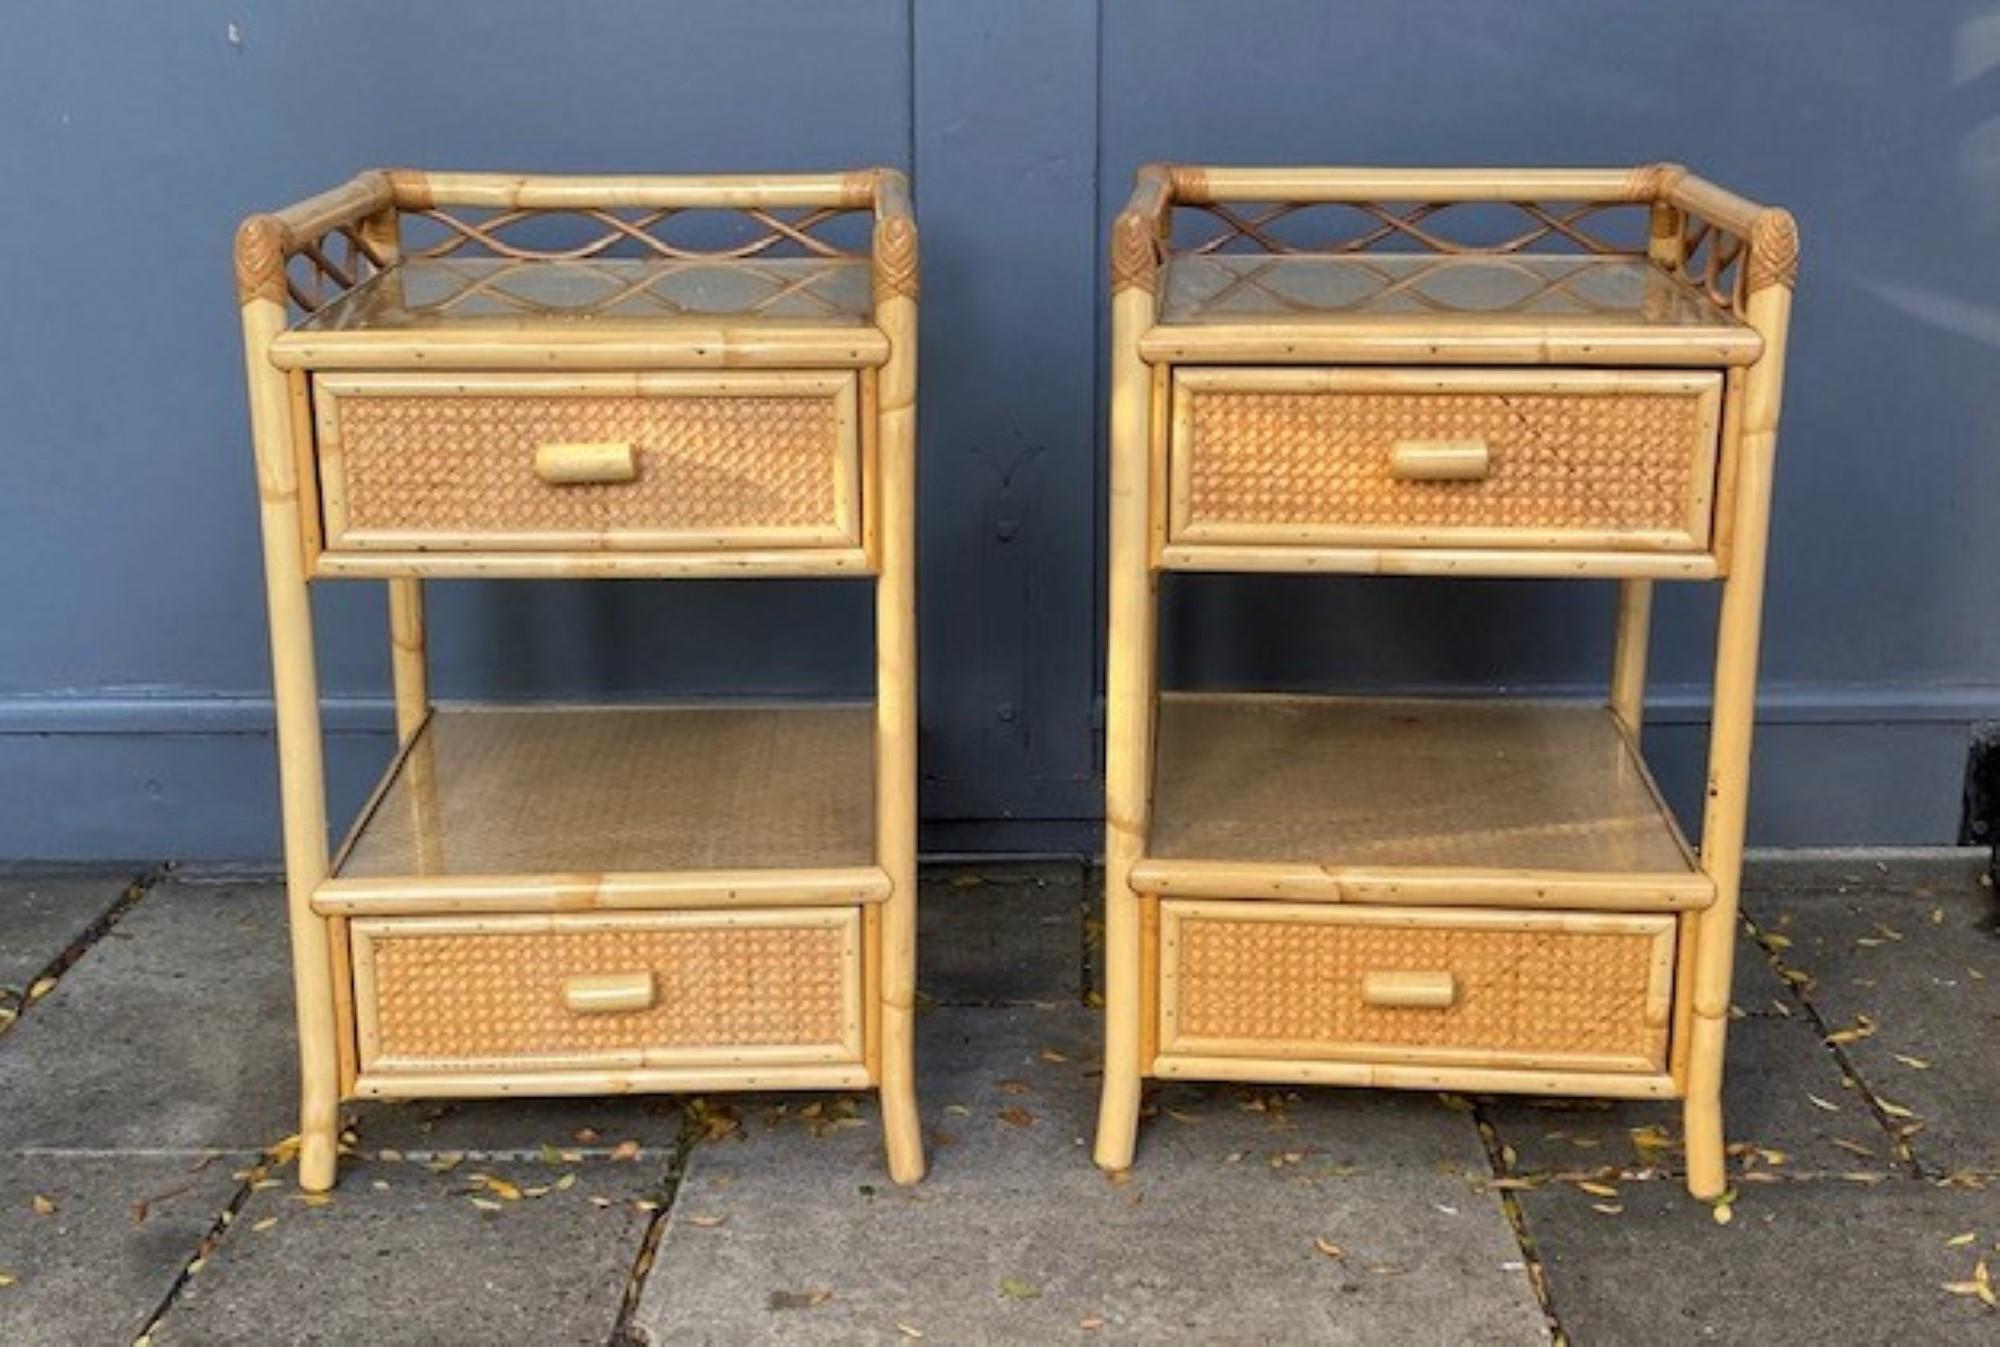 Pair of Angraves Mid Century Rattan / Cane Nightstands / Bedside Tables, English, 1970s

Pair of mid-century rattan / cane nightstands / bedside tables by English company, Angraves, England, 1970s.

Each nightstand has 2 x drawers with cane handles,